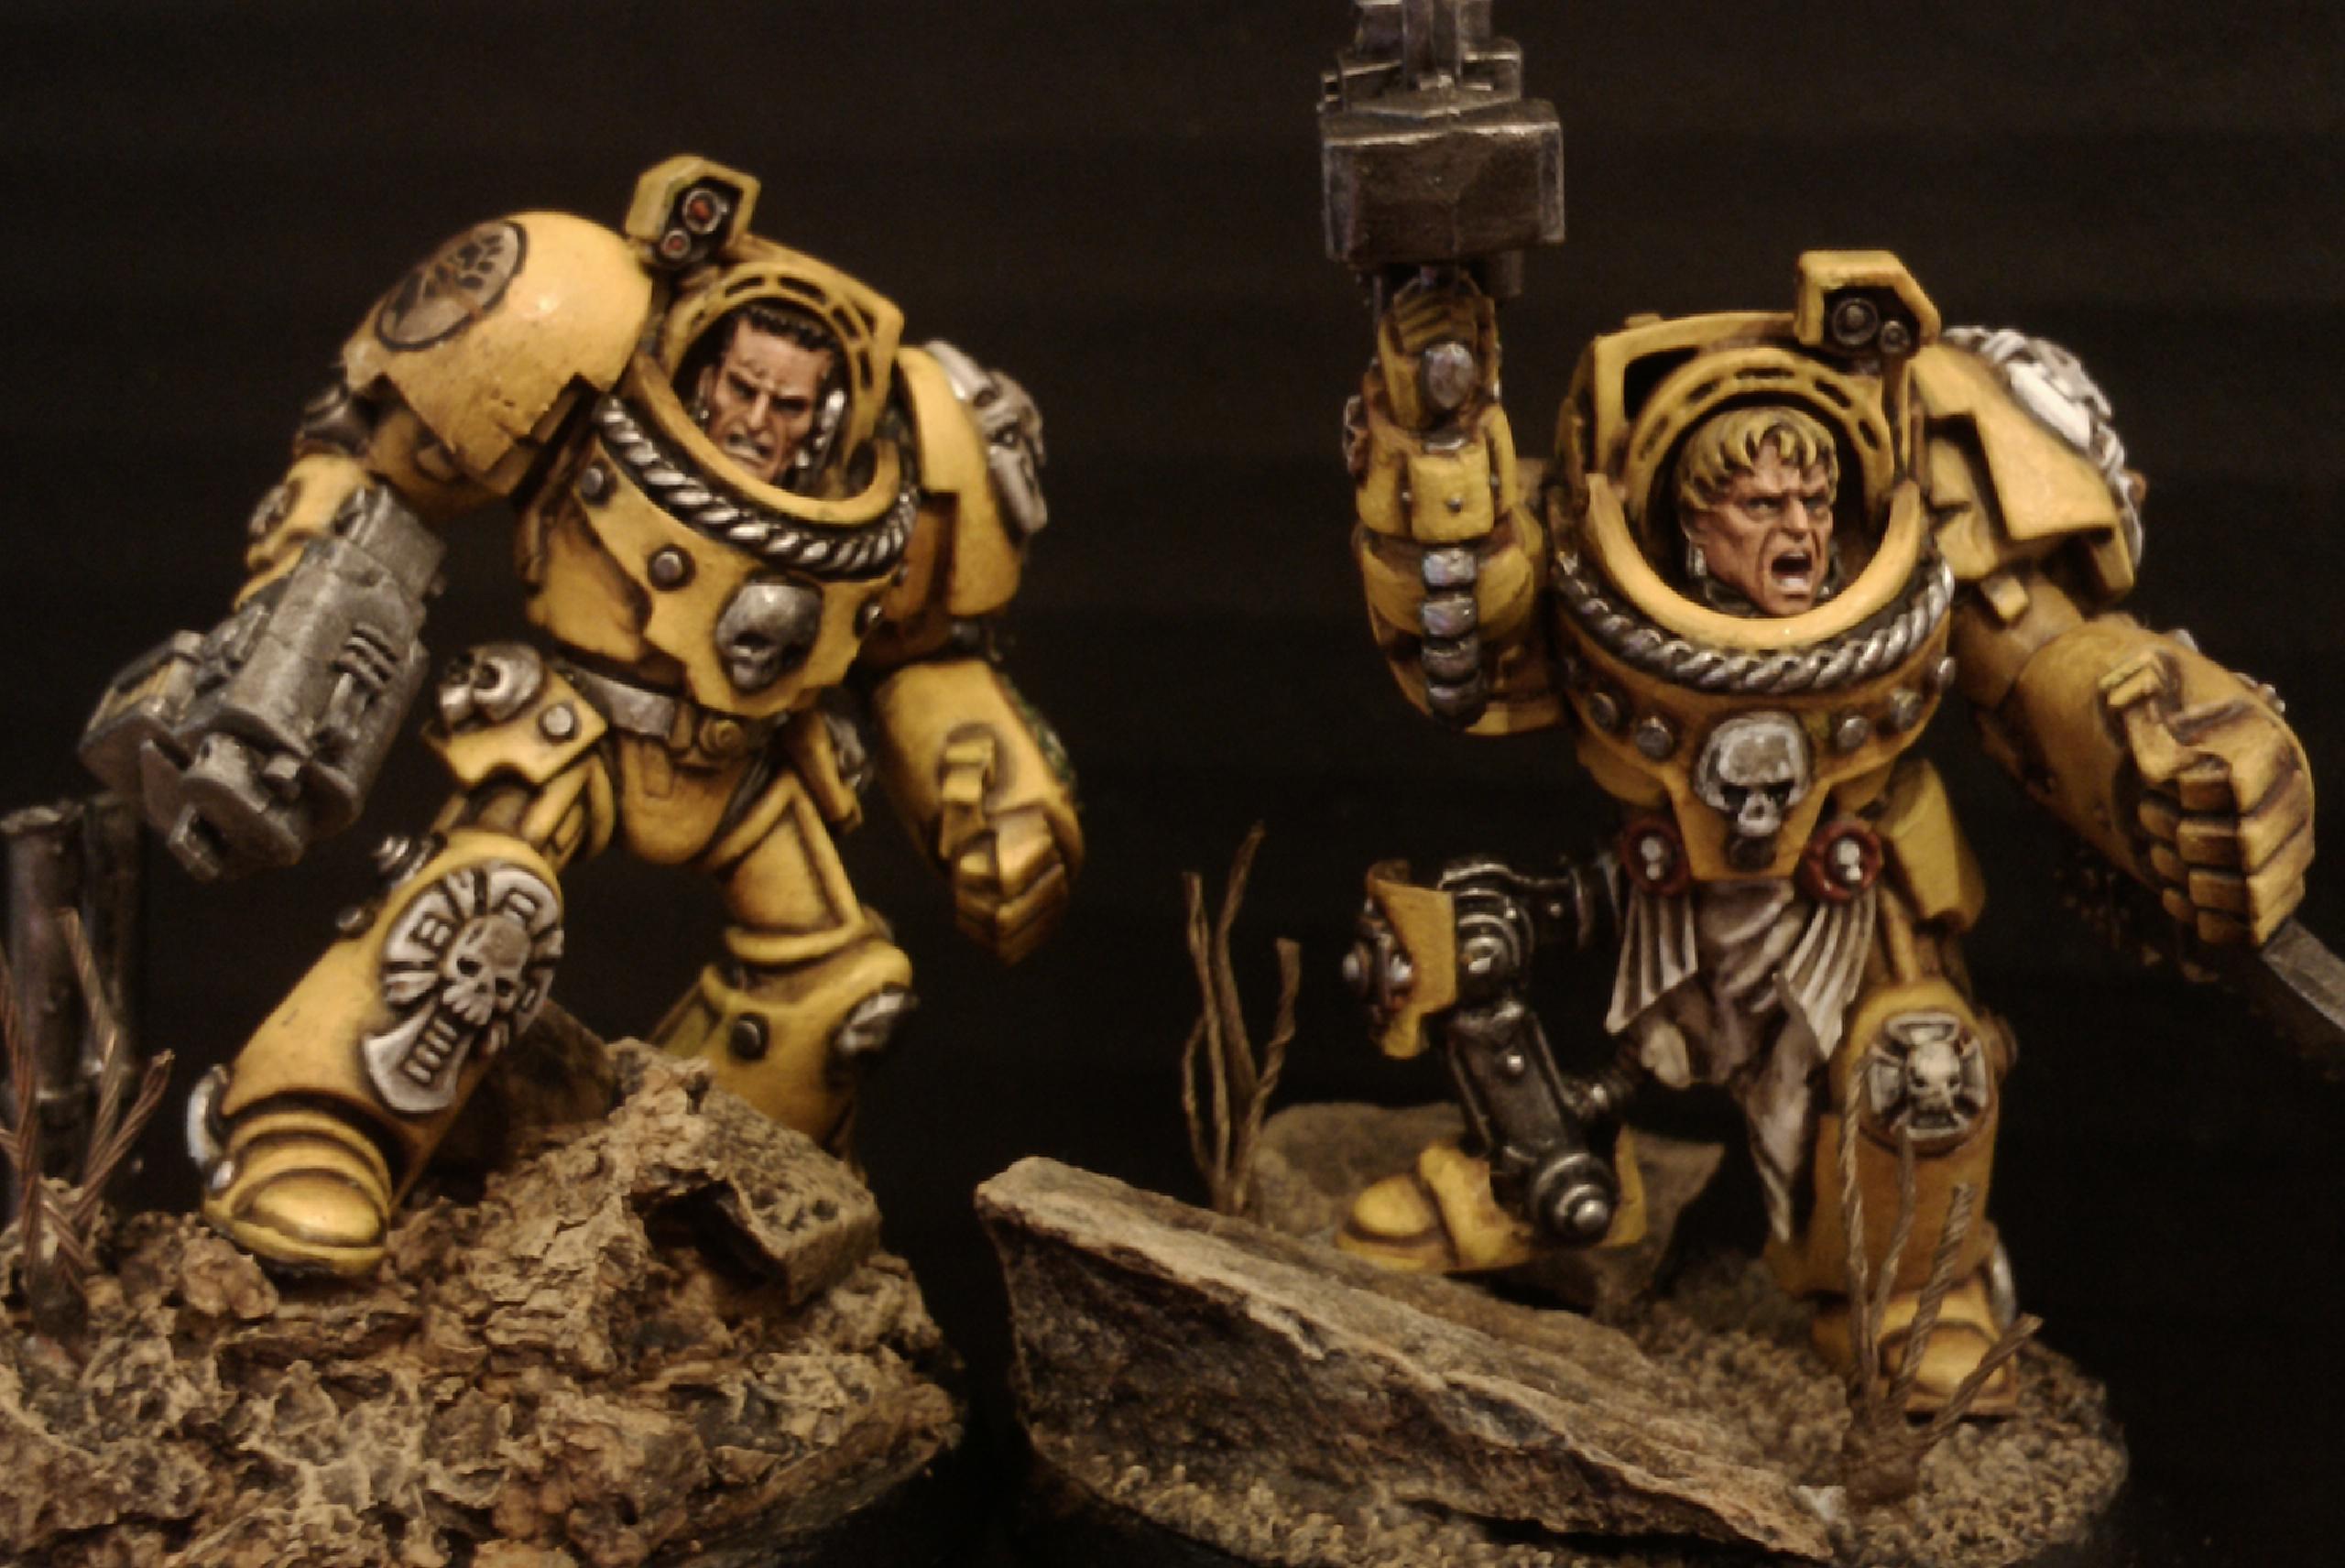 Imperial Fists, Space Marines, Terminator Armor